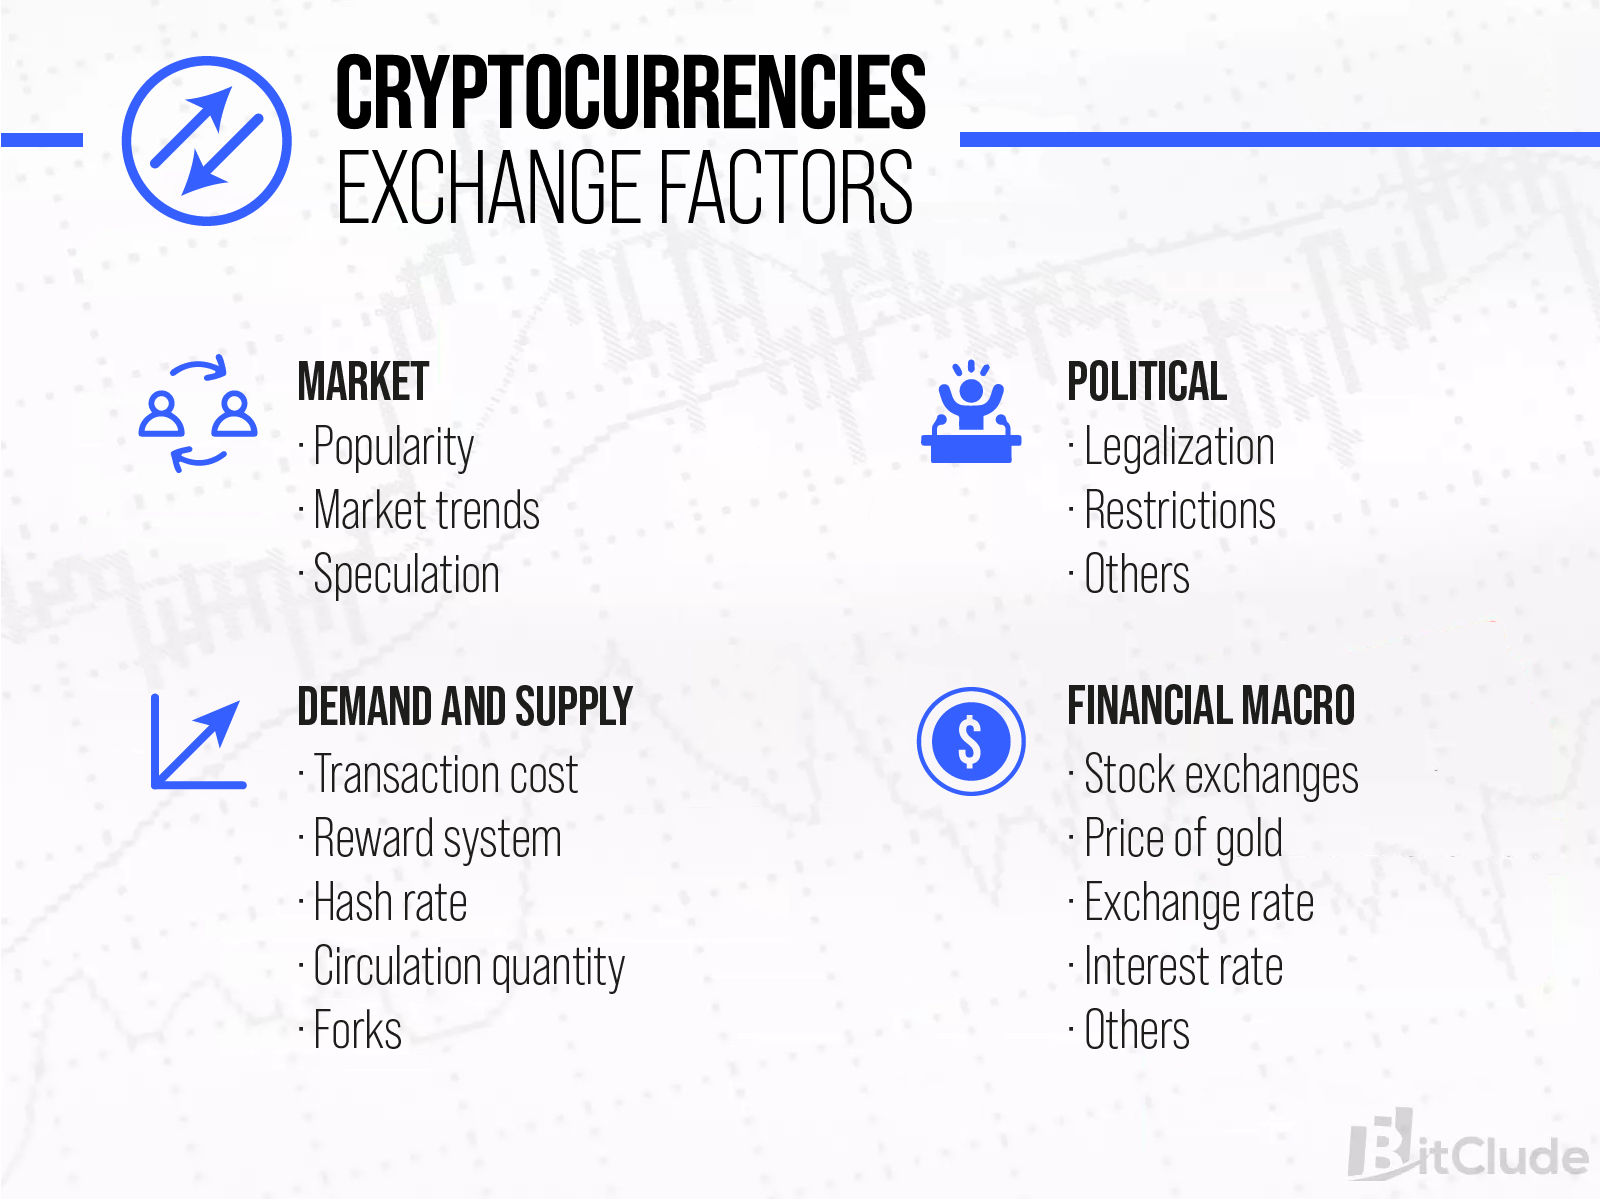 Factors influencing the cryptocurrency rate include transaction costs, network hash rates and legislative issues.